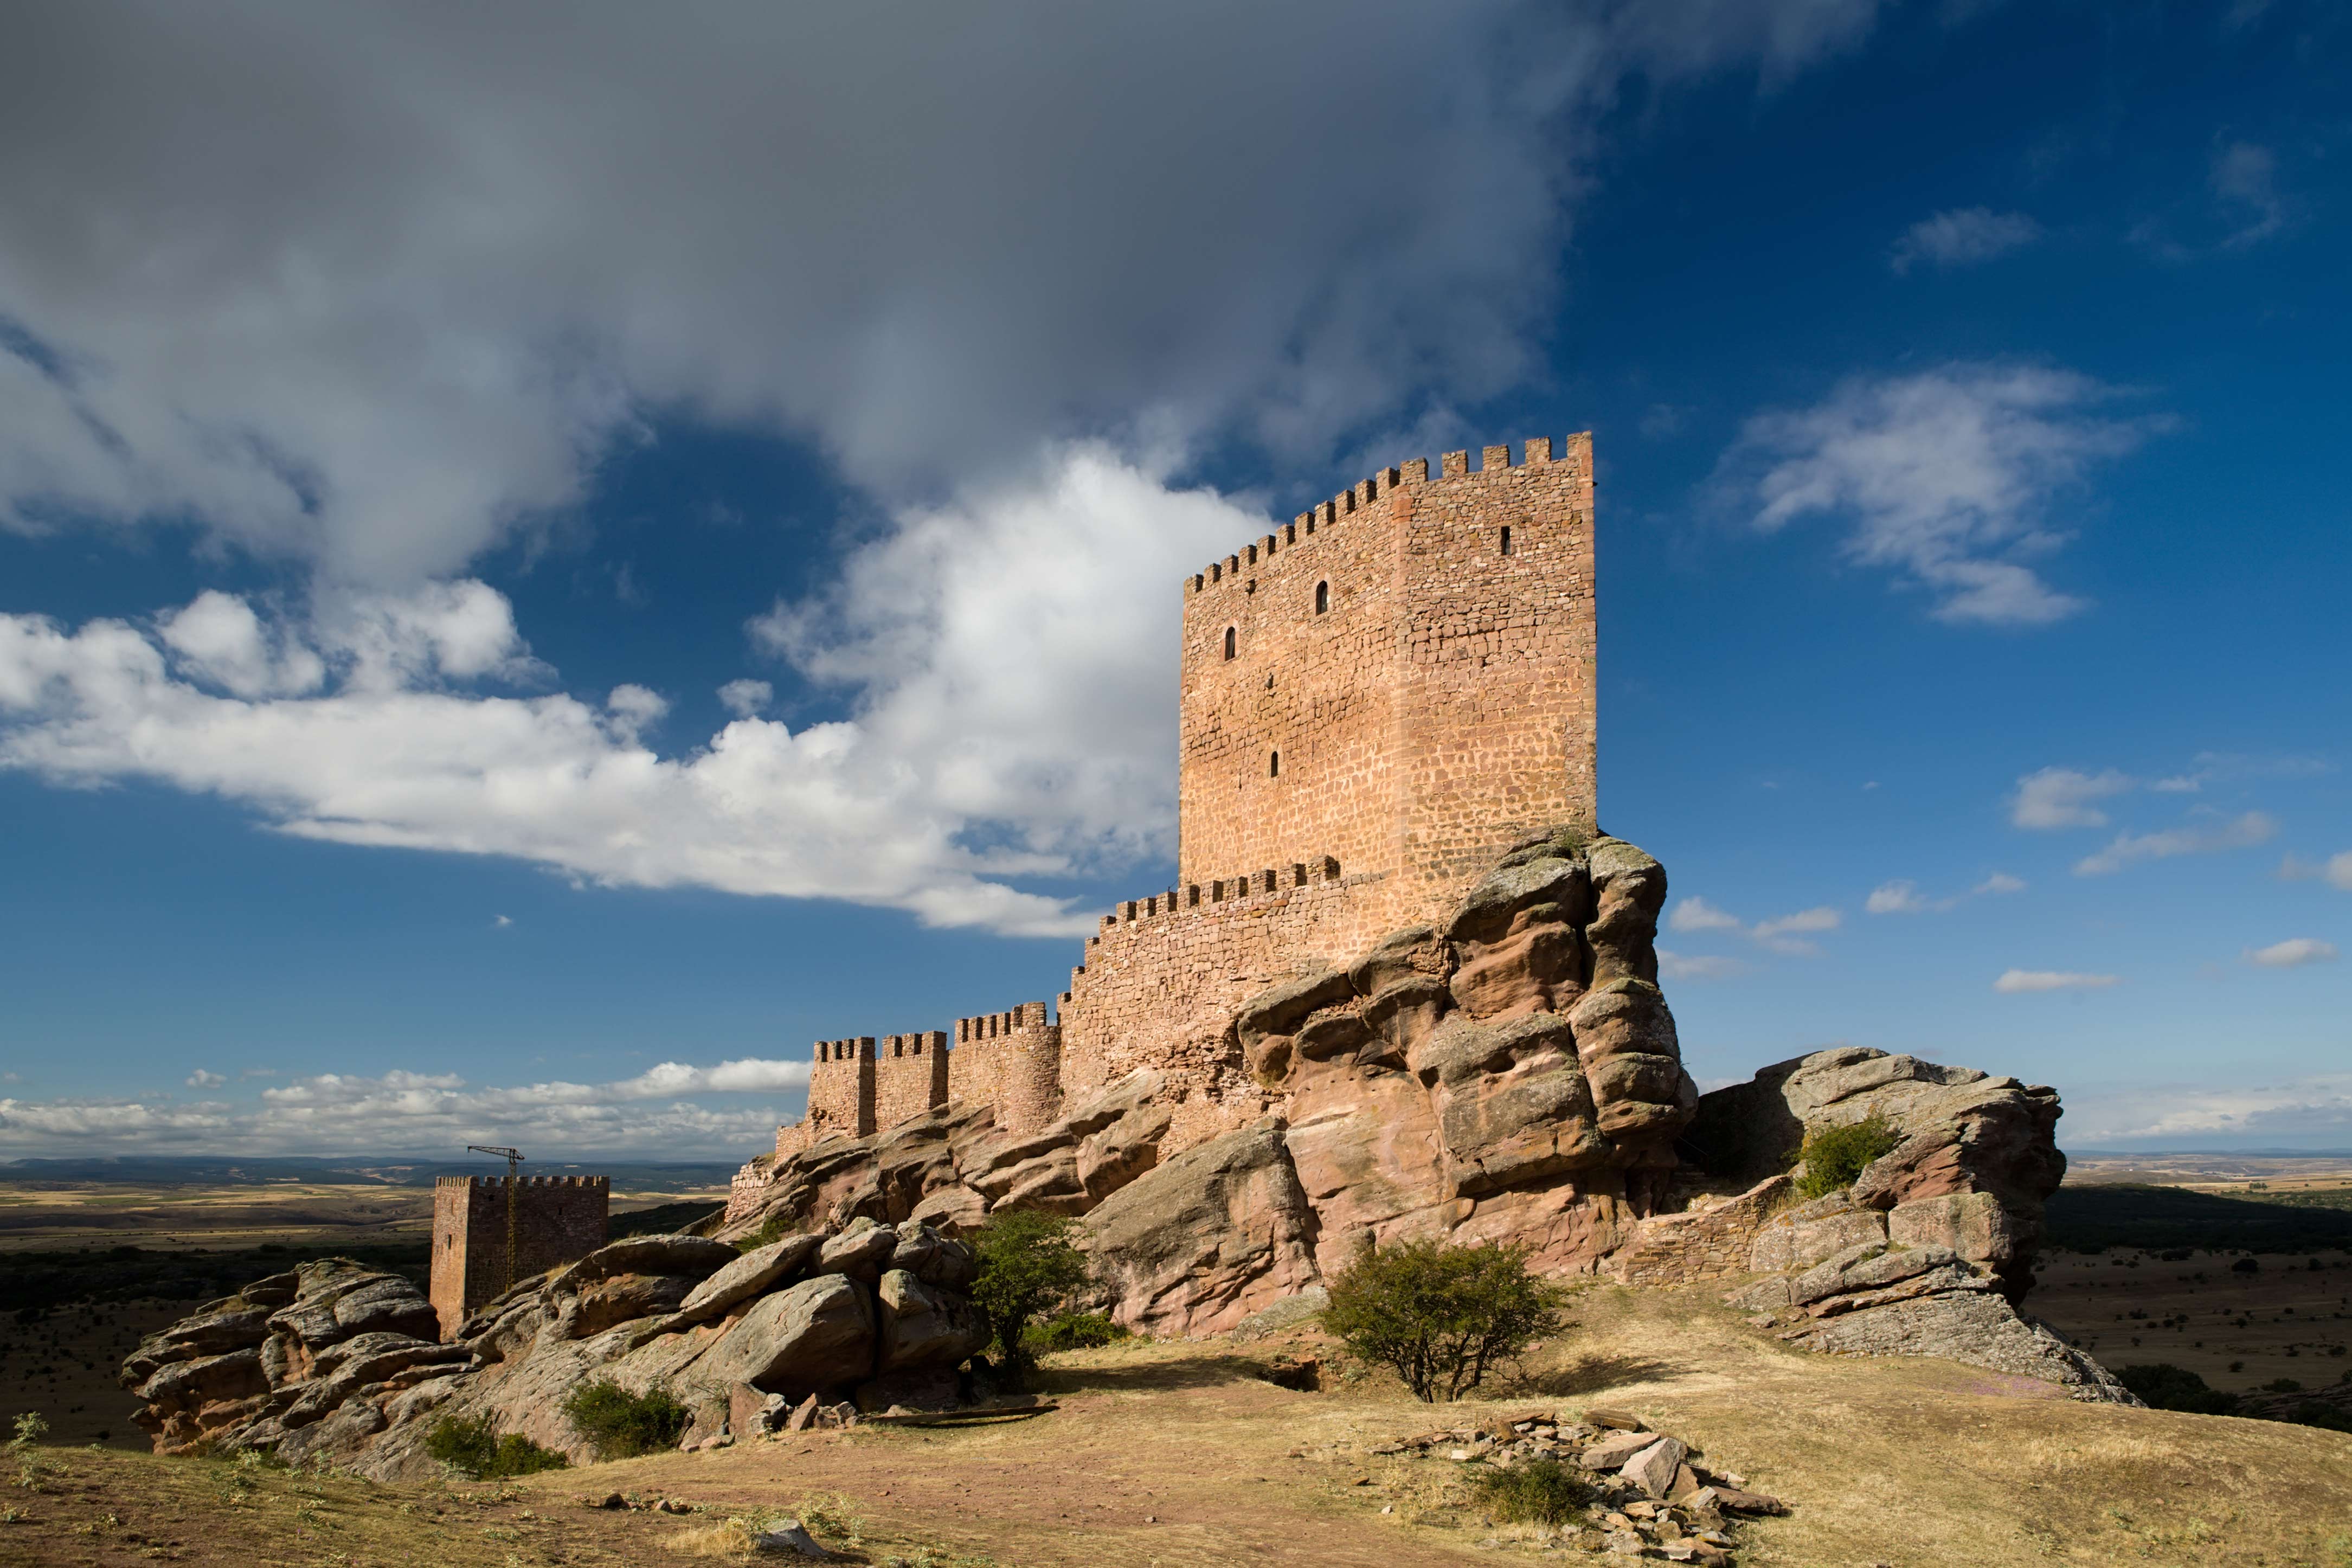 Game Of Thrones Season 6 Filming Locations In Real Life